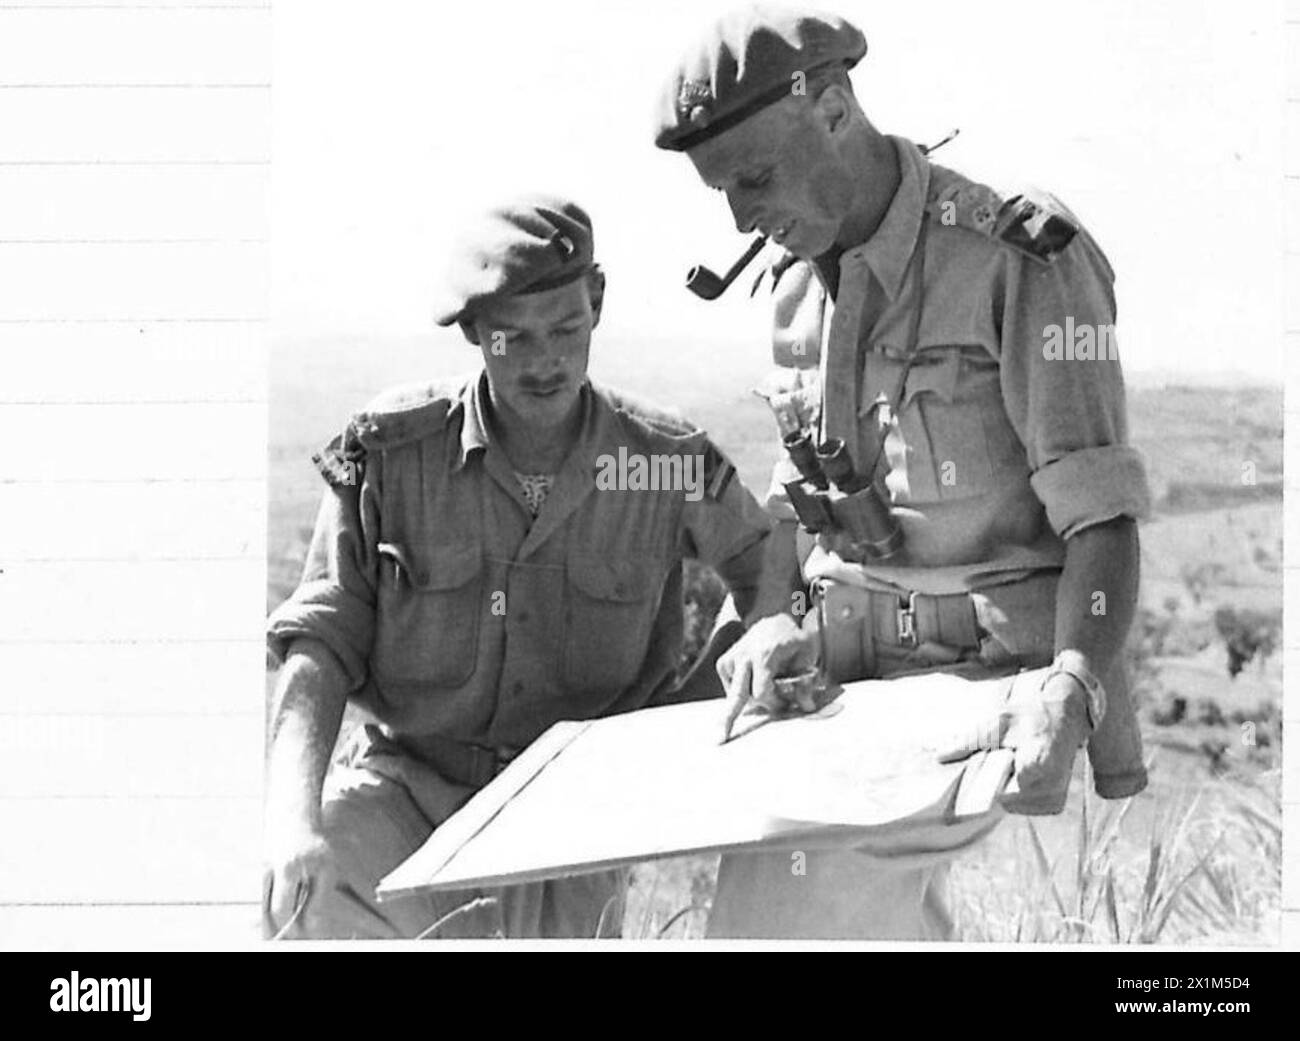 EIGHTH ARMY : CAPTURE OF TAVOLETO - At 11th Brigade HW, Brigadier H.C. Partidge, DSO., and Lieut. Colonel D.M.C. McDowell, discuss the next move, British Army Stock Photo